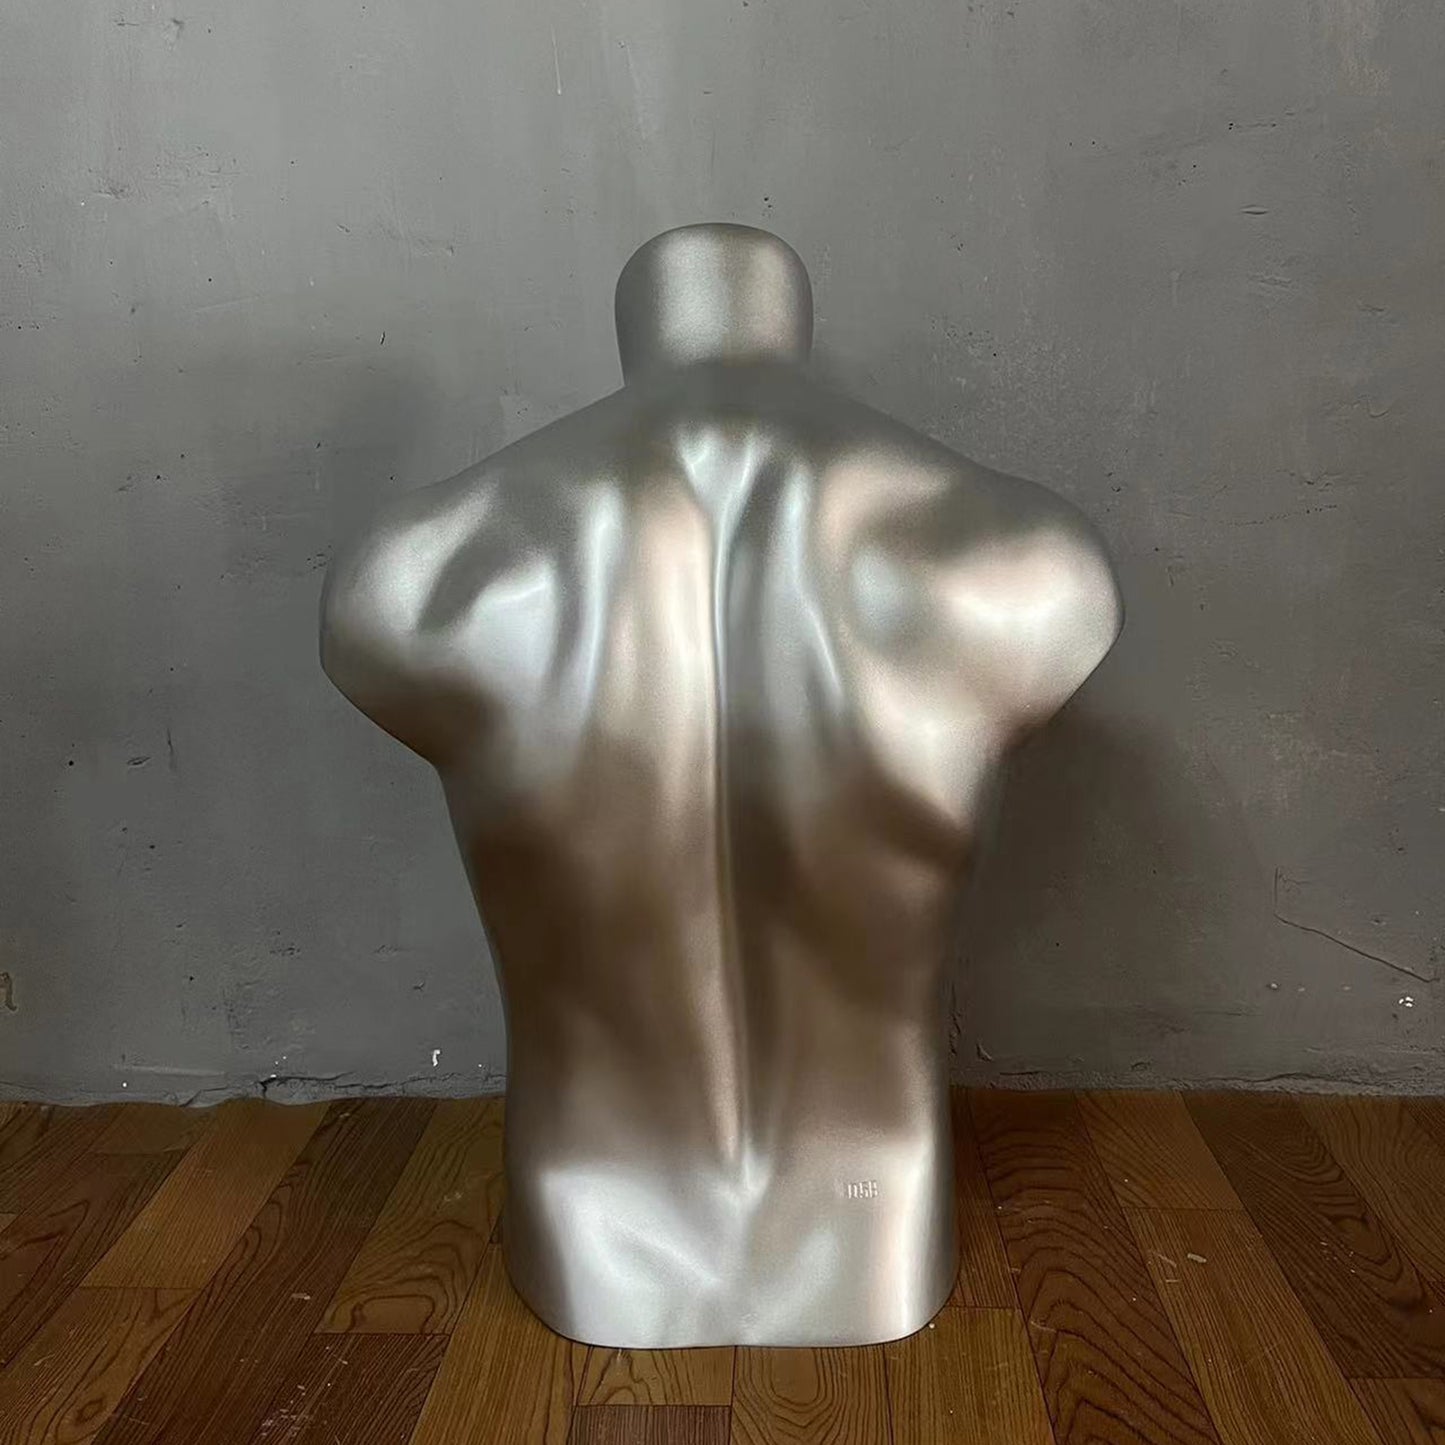 Jelimate Fiberglass Fashion Male Sport Mannequin Torso,Elbow,Arms,Waist And Hip Protector Props,Athletic Brace Display Silver Mannequin Men Display Model Props